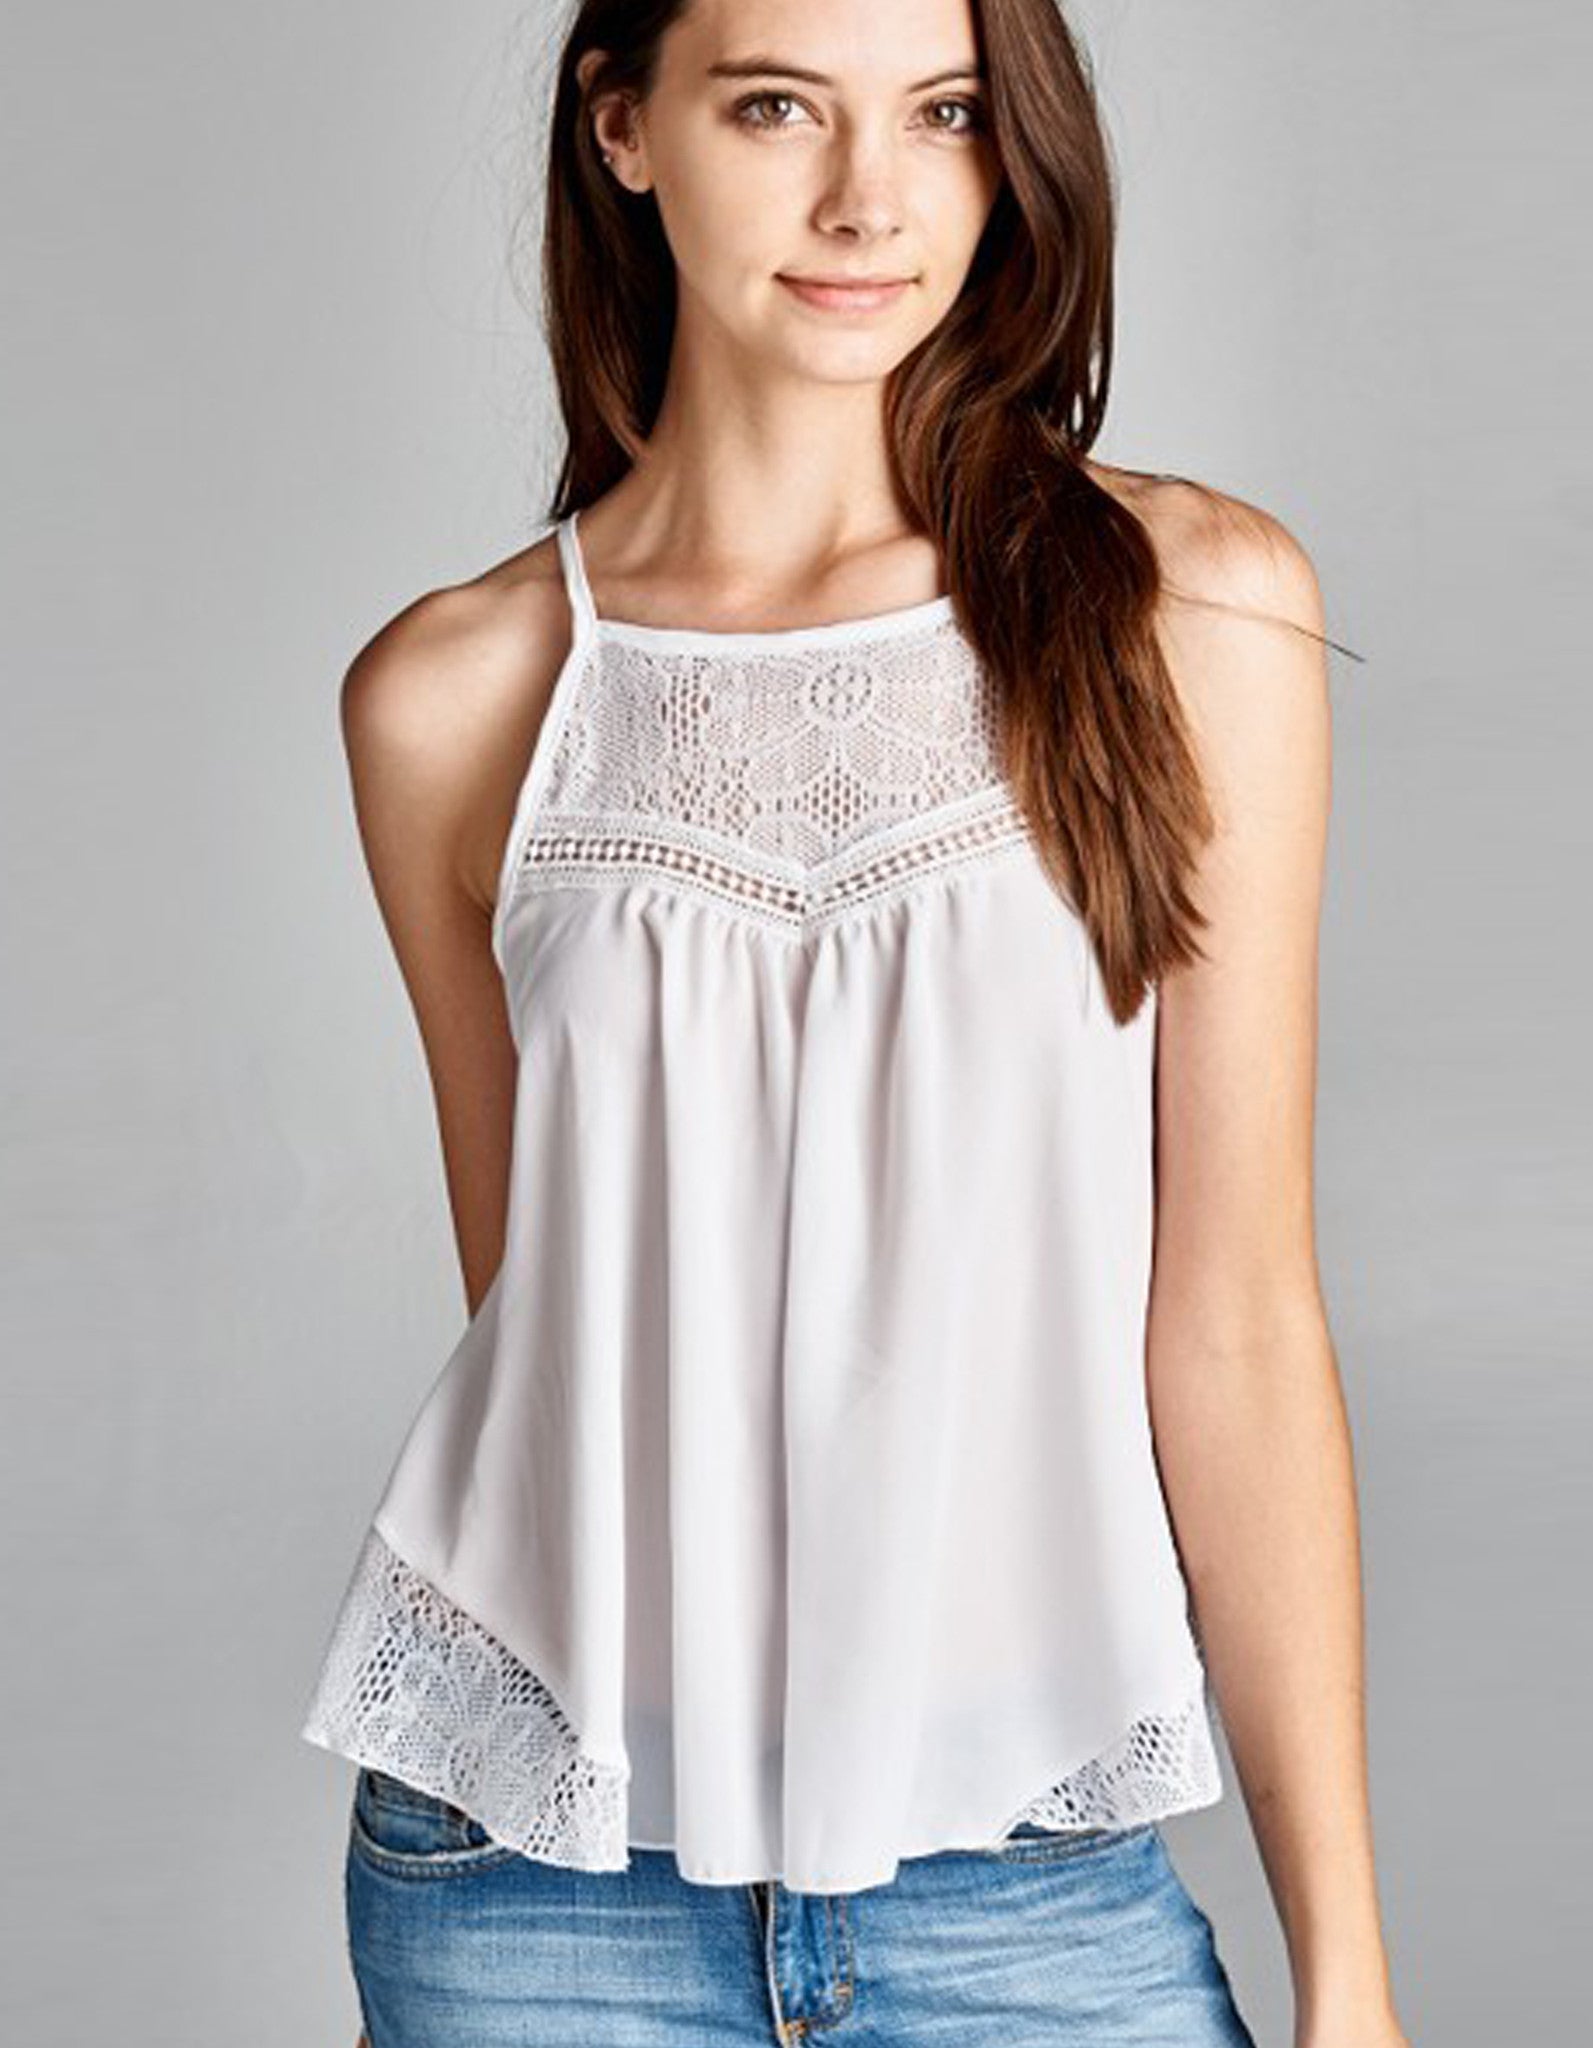 Tank Top White With Lace Neckline